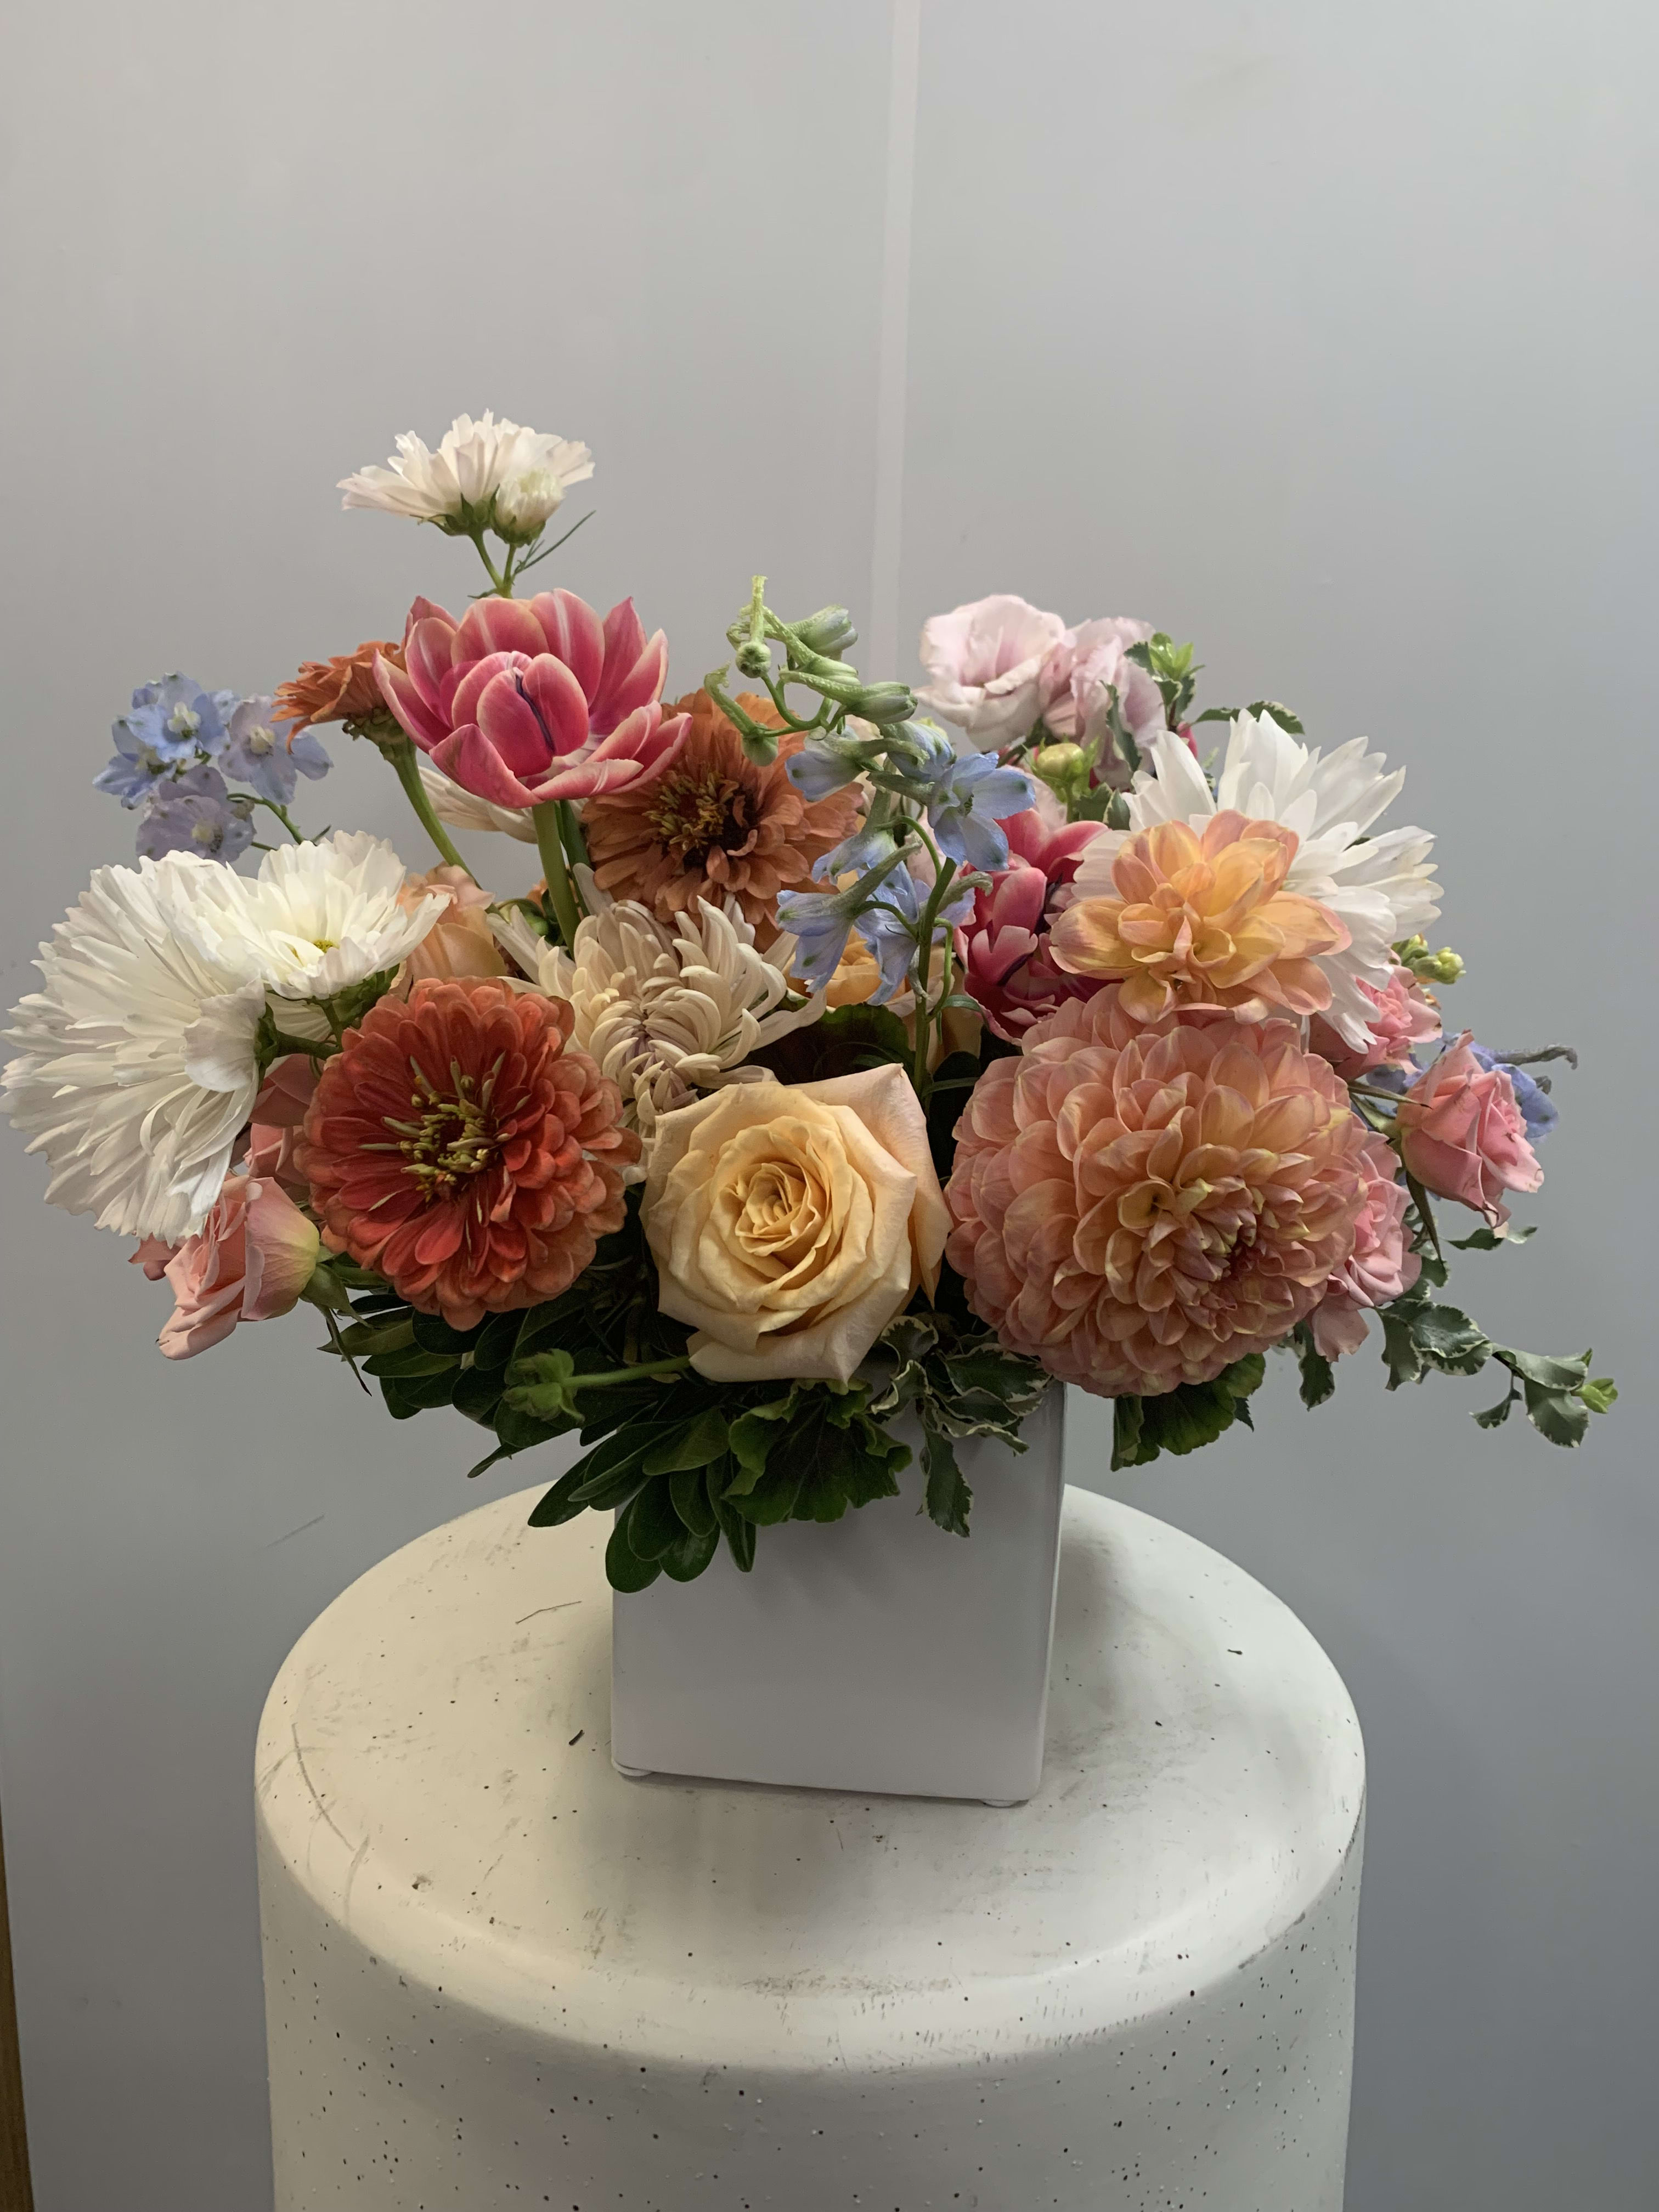 The Garden Party - Perfect for an event outdoors or in. This arrangements evokes the most sophisticated garden party around. Filled with beautiful seasonal blooms including which may include dahlias, delphinium, roses, ranunculus and other garden style flowers.***** Colors and flowers will vary depending on seasonal availability. ****